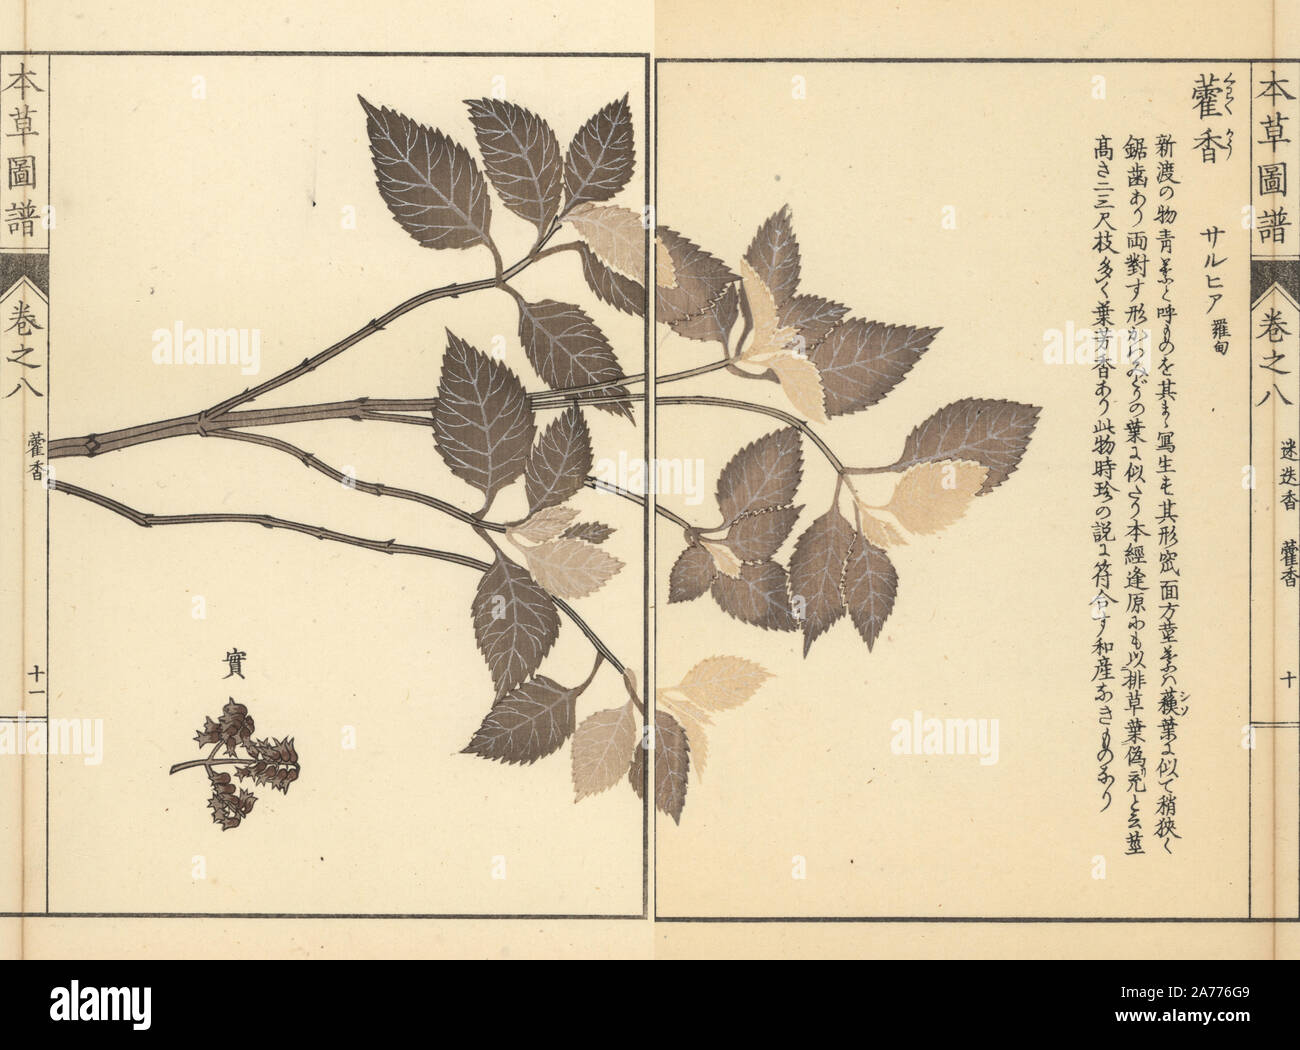 Lophanthus sp. Colour-printed woodblock engraving by Kan'en Iwasaki from 'Honzo Zufu,' an Illustrated Guide to Medicinal Plants, Japan, 1884. Iwasaki (1786-1842) was a Japanese botanist, entomologist and zoologist. He was one of the first Japanese botanists to incorporate western knowledge into his studies. Stock Photo